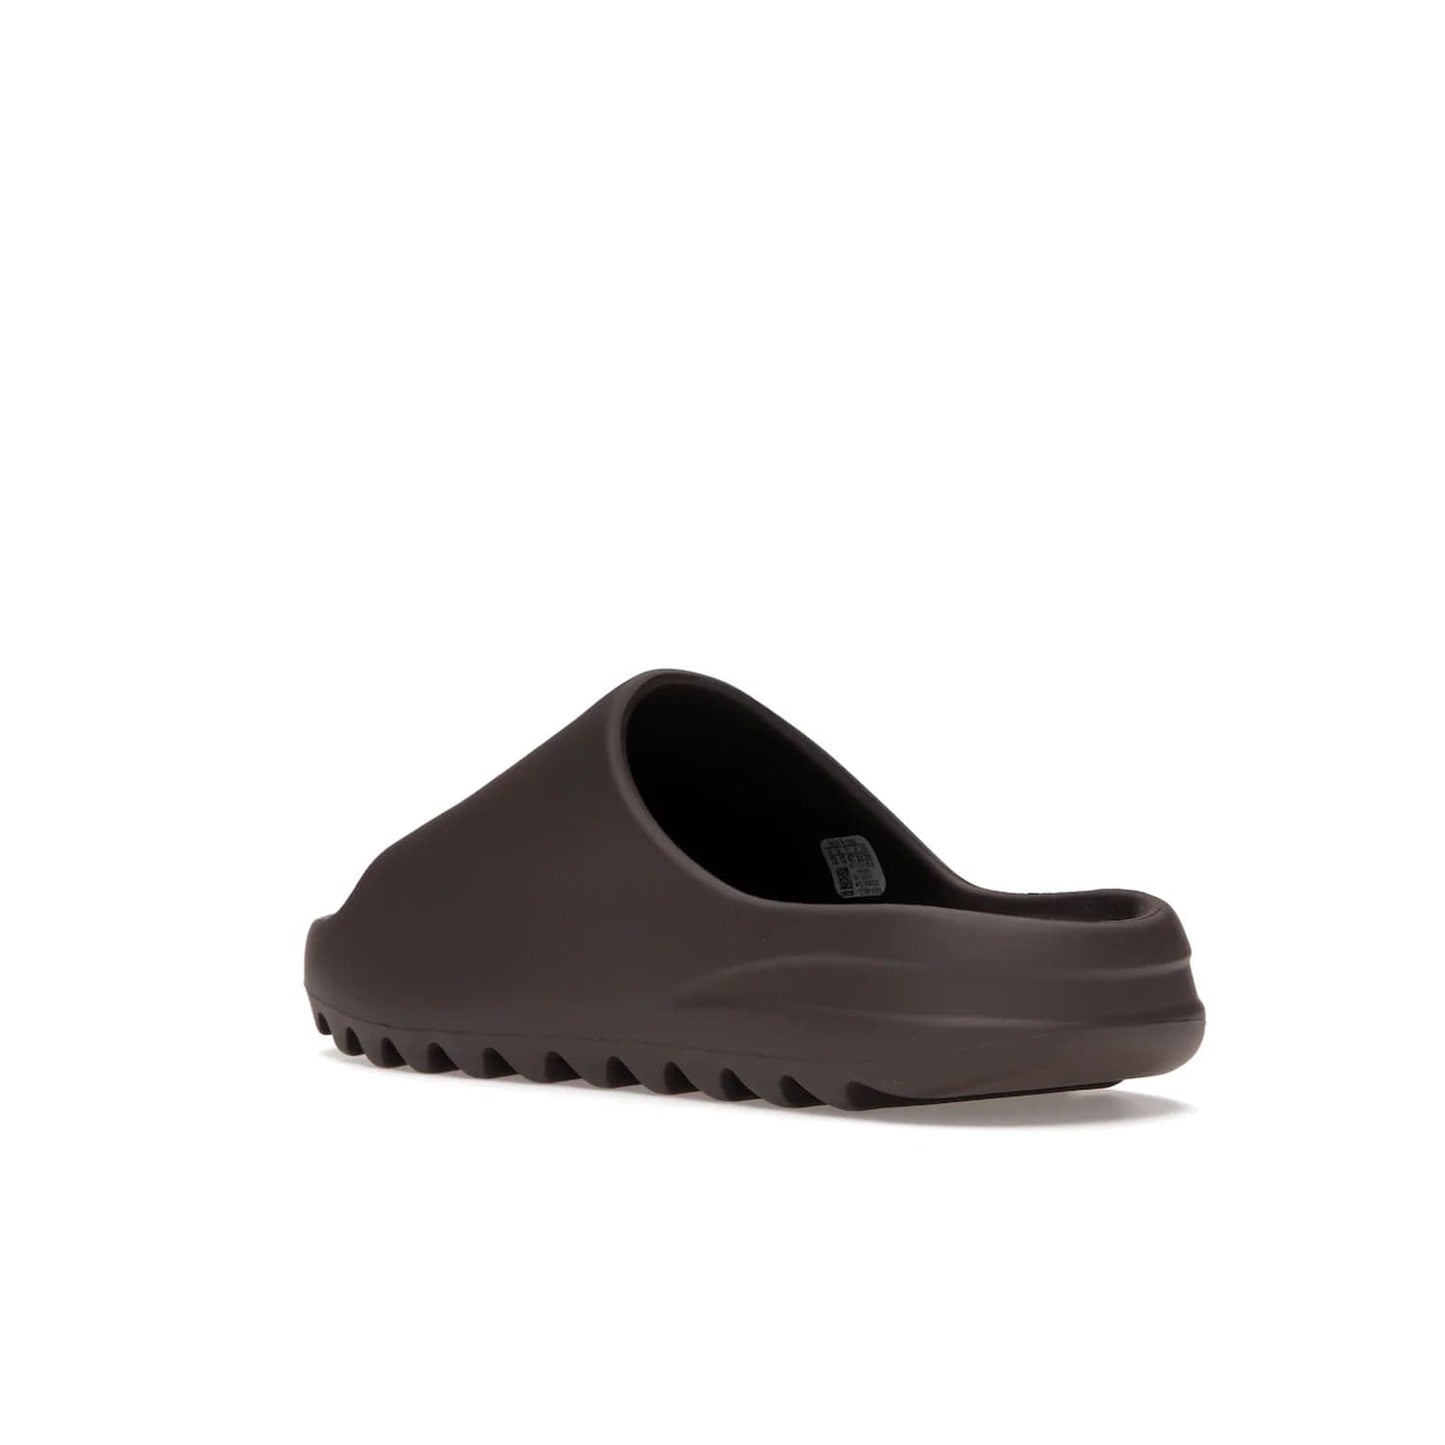 adidas Yeezy Slide Soot - Image 24 - Only at www.BallersClubKickz.com - Shop the Yeezy Slide Soot sneaker by Adidas, a sleek blend of form and function. Monochrome silhouette in Soot/Soot/Soot. Lightweight EVA foam offers comfort and durability. Get the must-have style today.